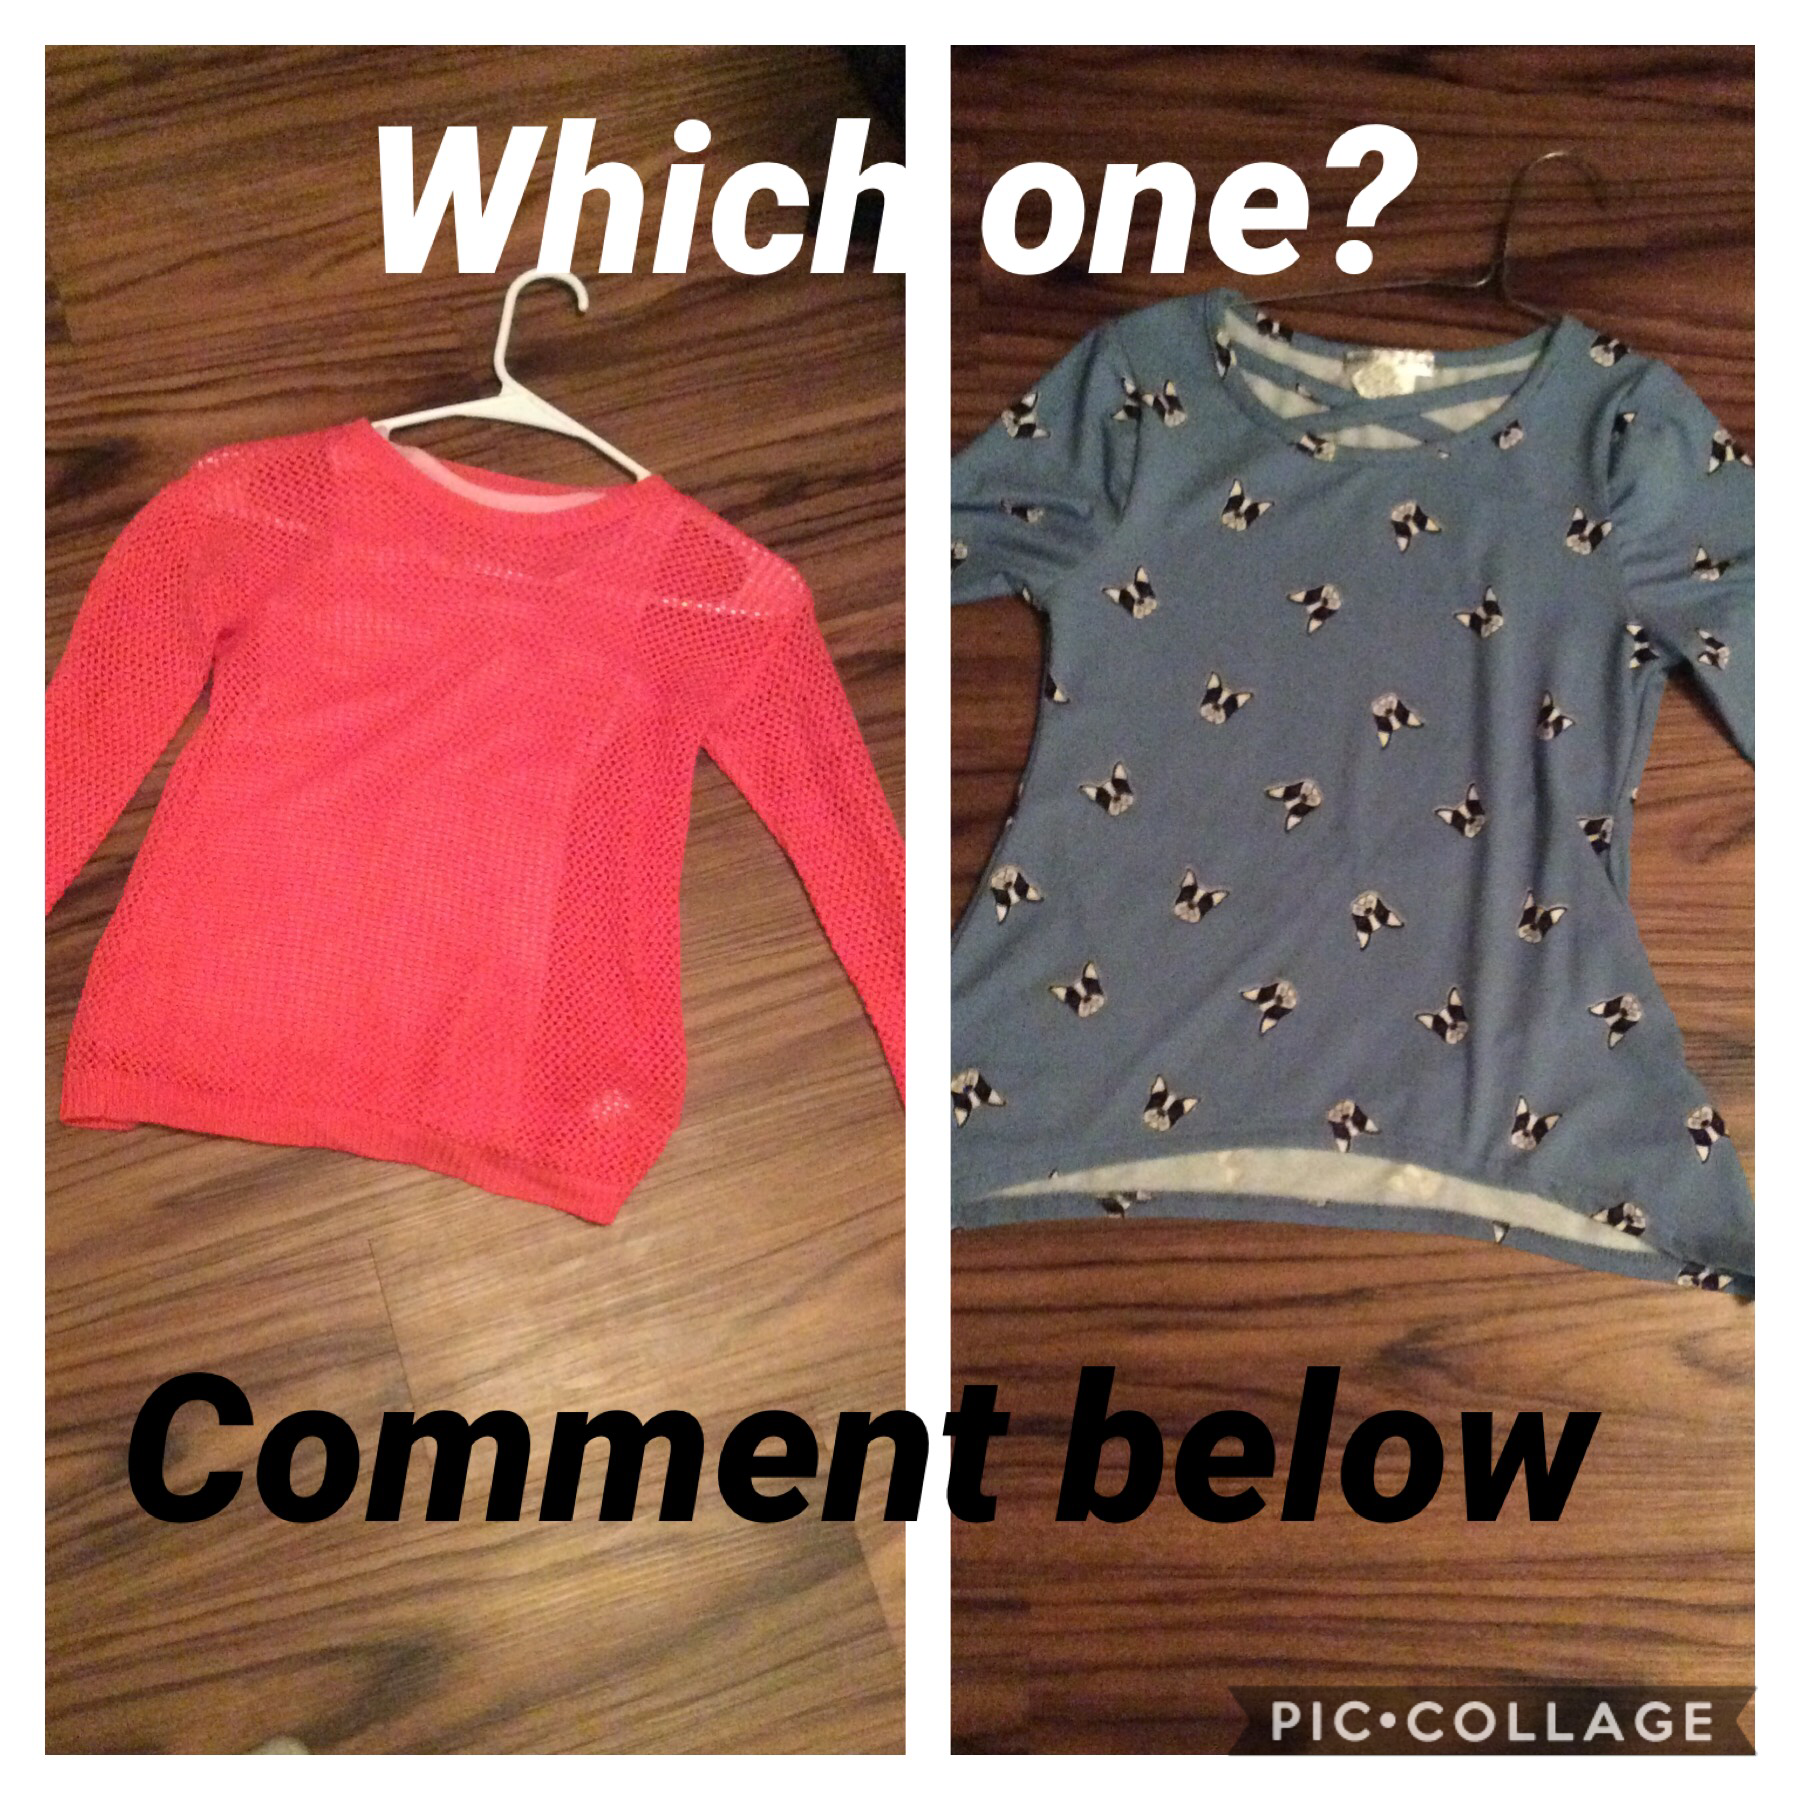 I need help which thanksgiving outfit 